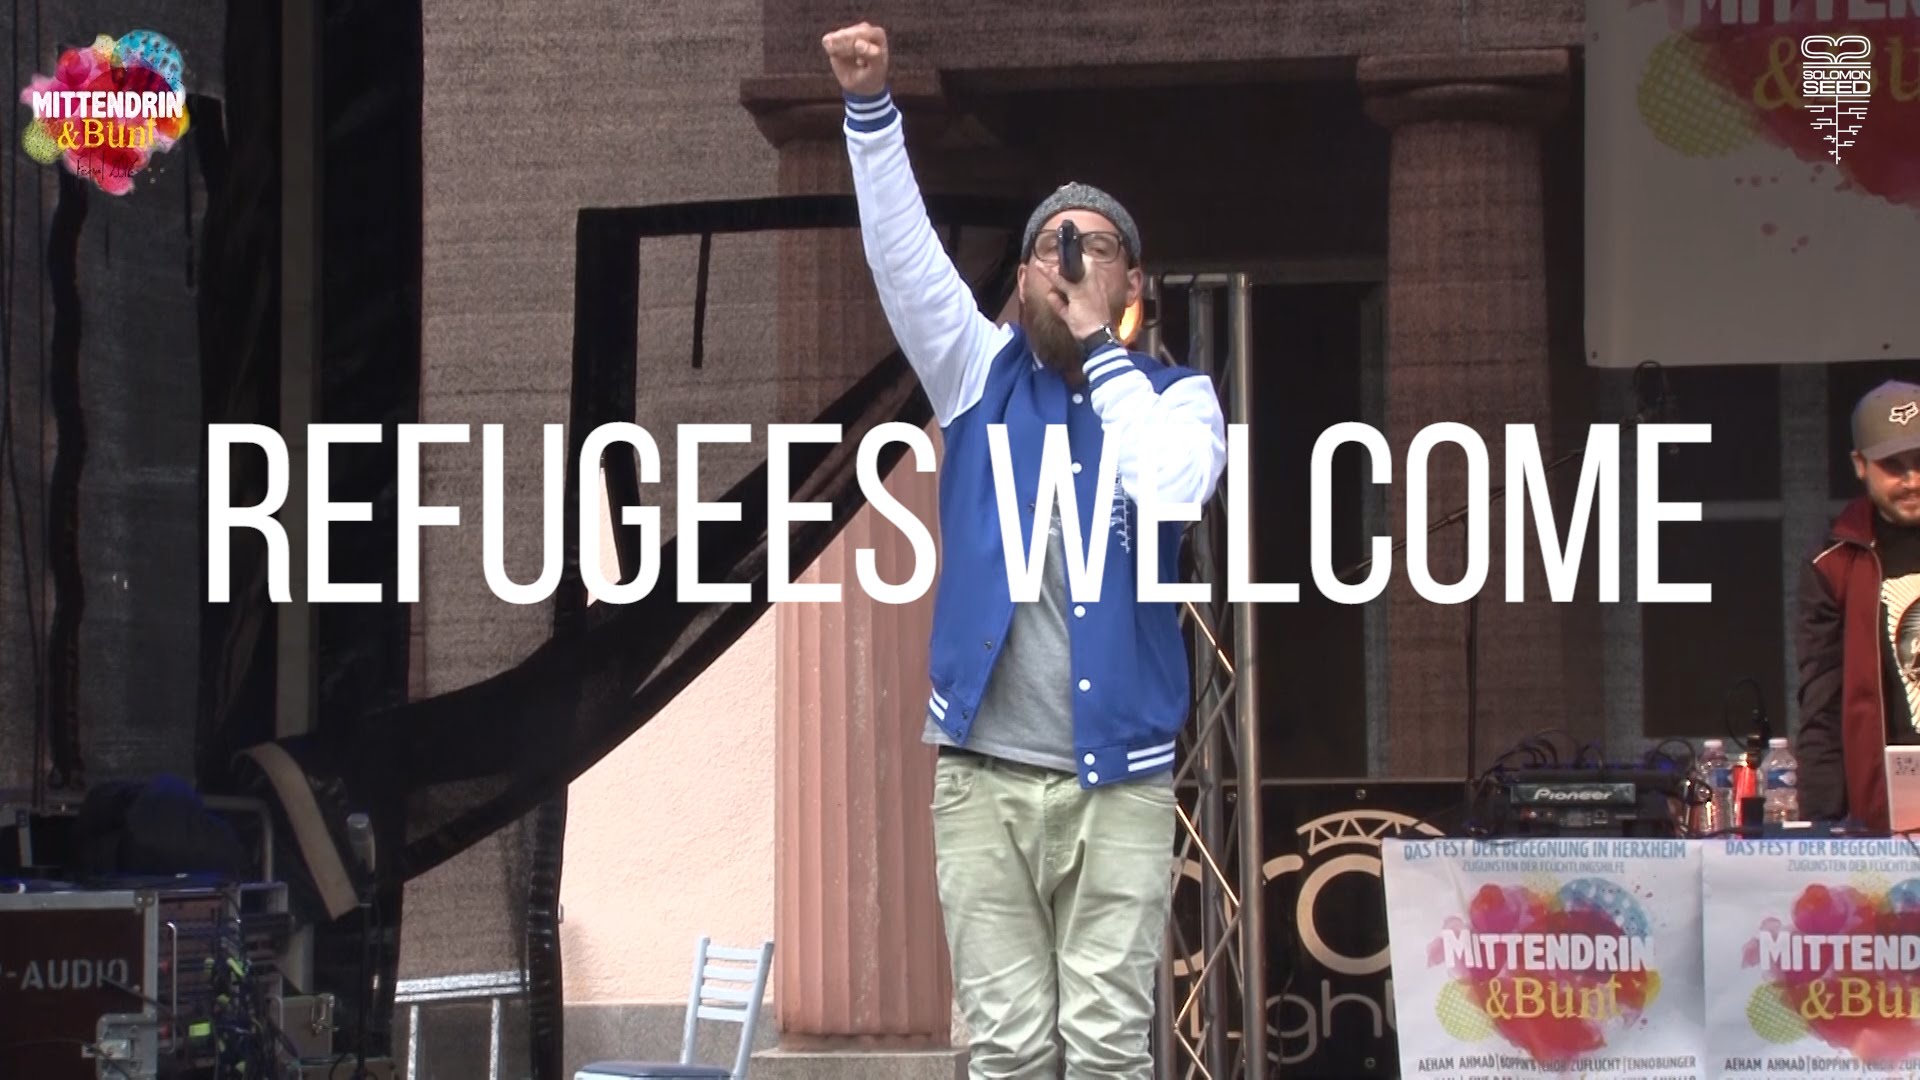 Solomon Seed - Refugees Welcome / Hey Mama in Herxheim, Germany @ Mittendrin & Bunt Festival 2016 [5/15/2016]